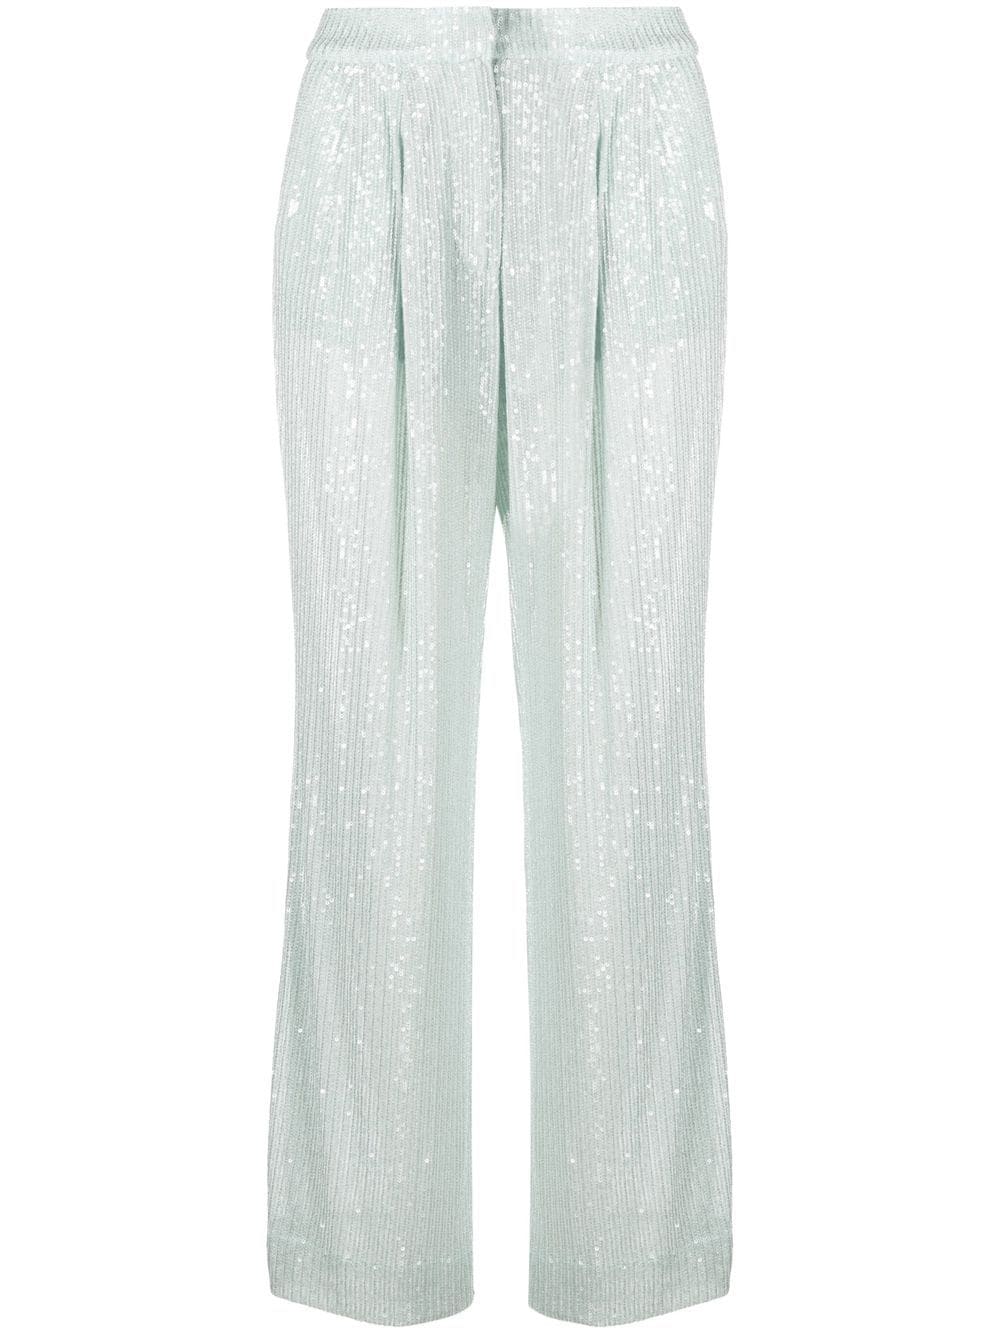 Rotate Birger Christensen Sequin-embellished Trousers In Blue